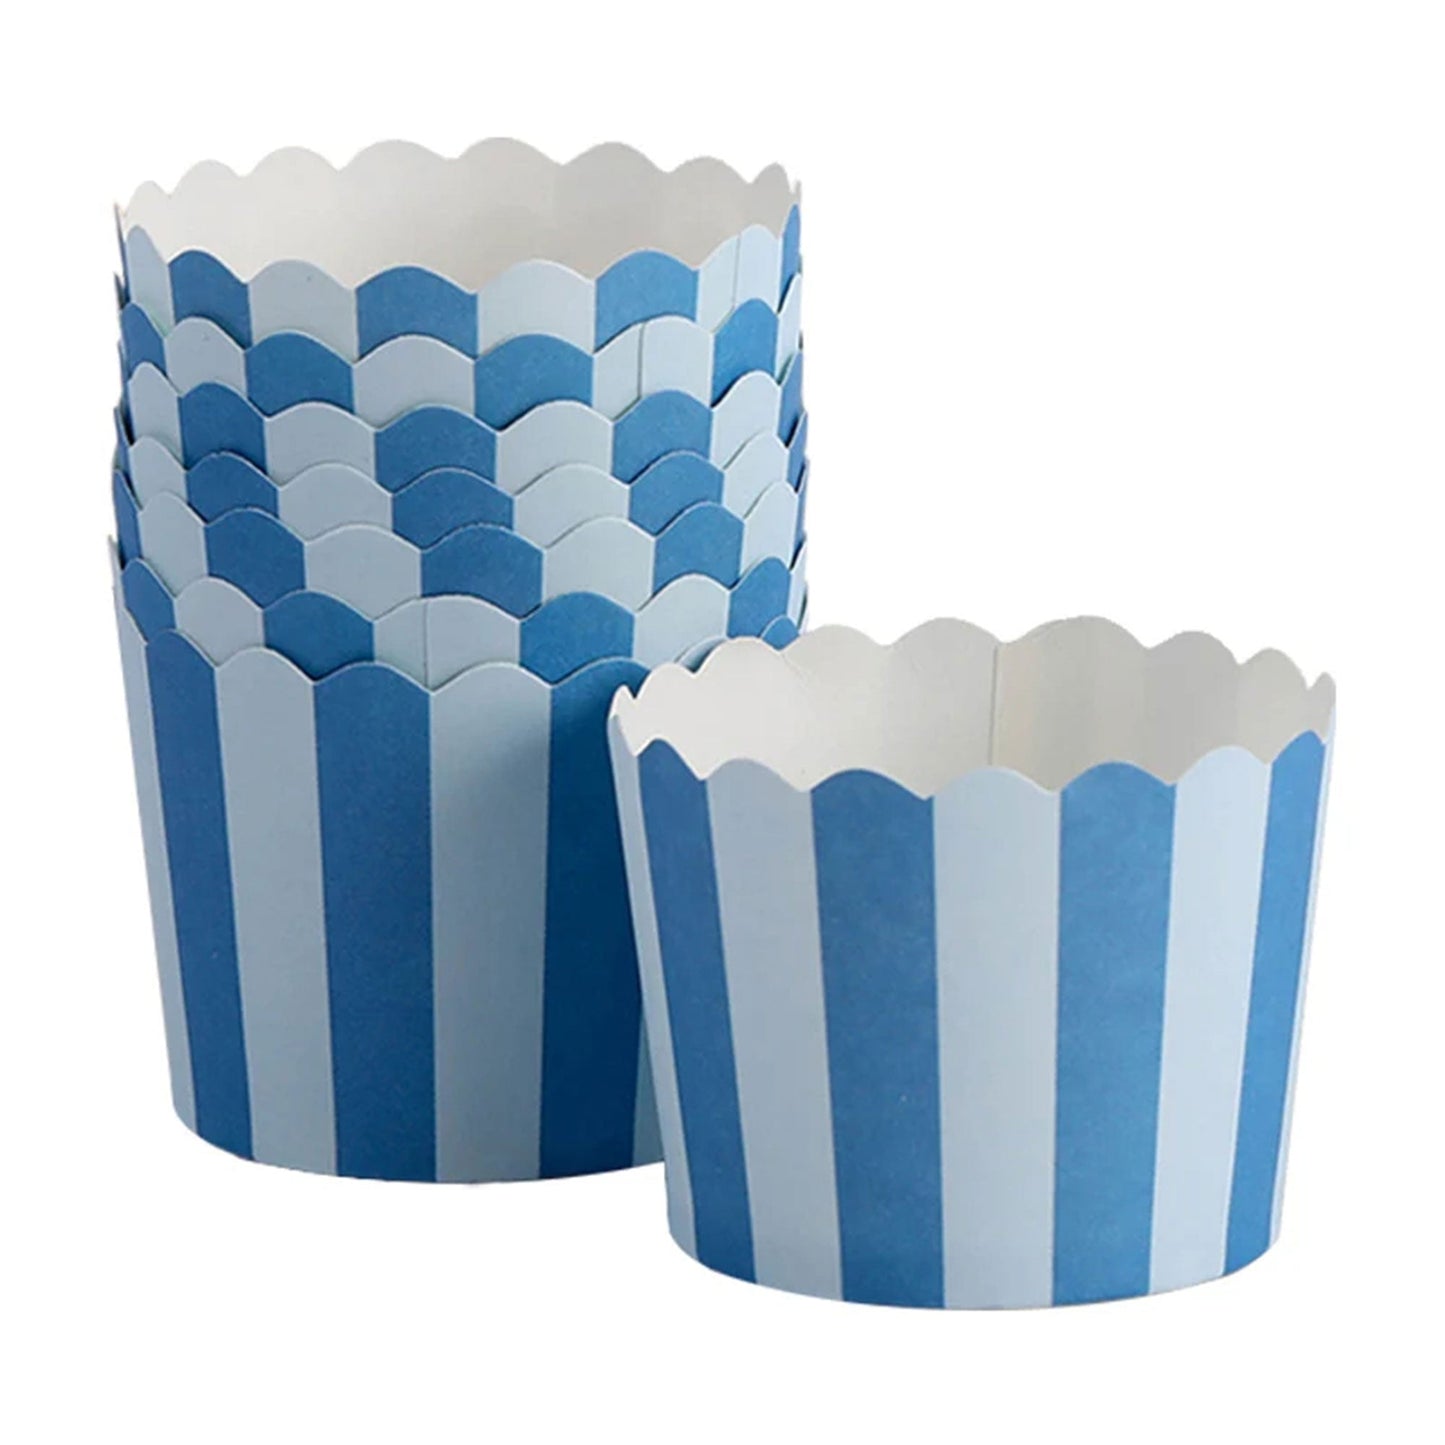 Round Cupcake Liners Disposable Baking Wrappers 20 Pcs